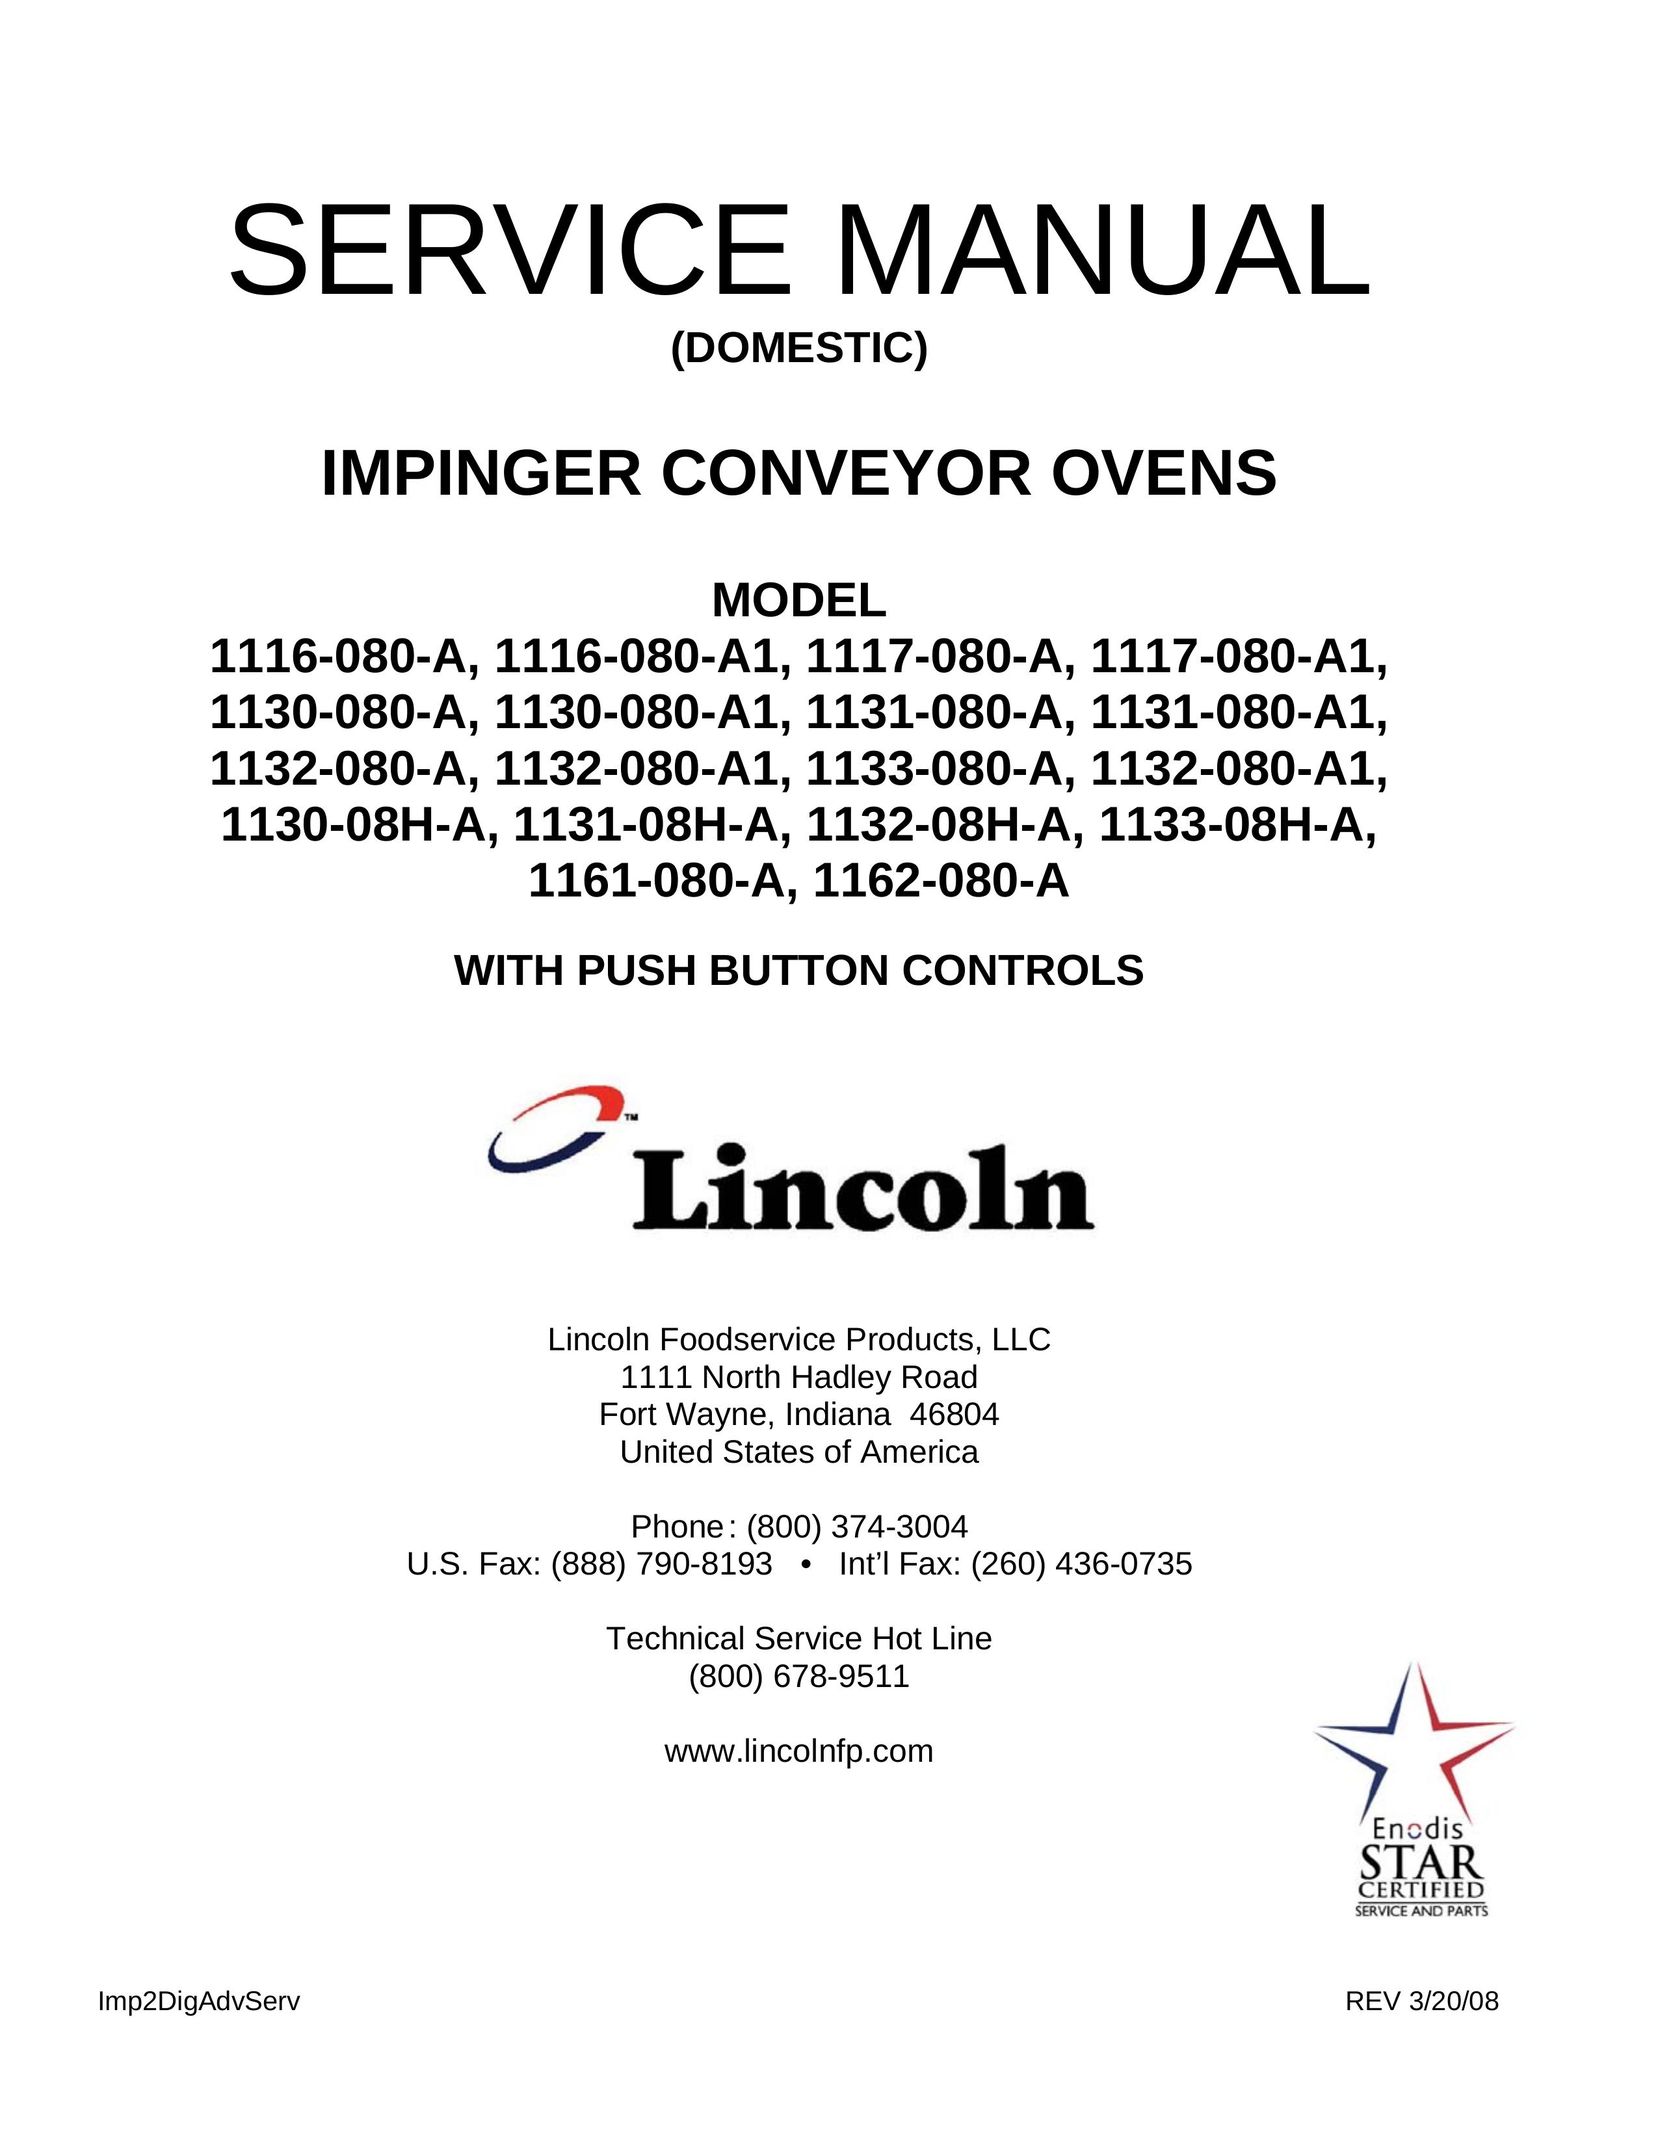 Lincoln 1133-08H-A Convection Oven User Manual